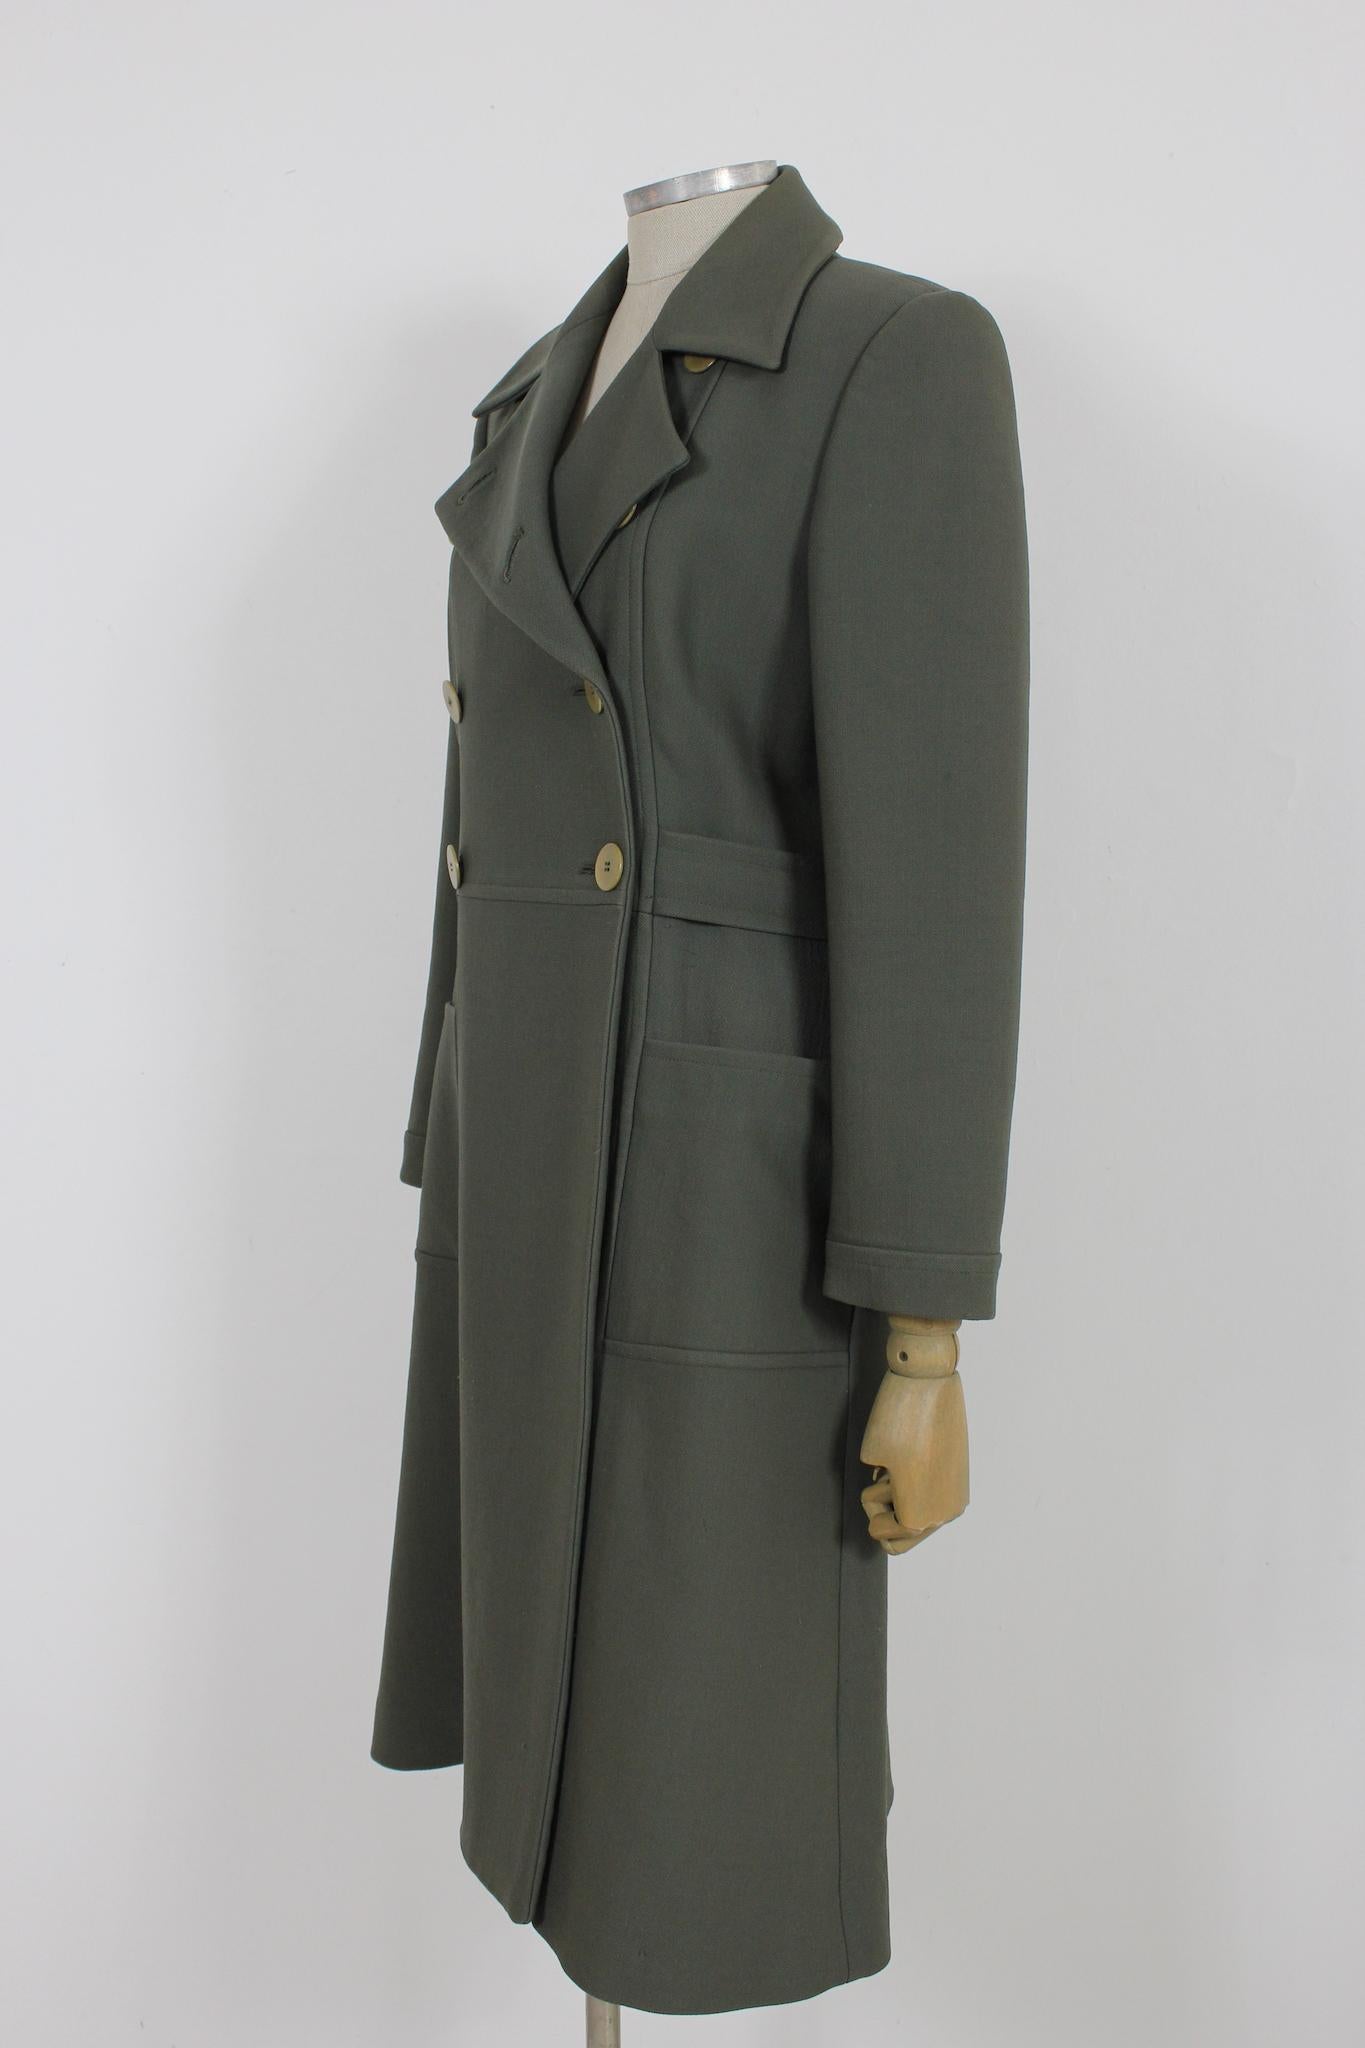 Giorgio Armani Gray Wool Double Breasted Vintage Coat In Excellent Condition For Sale In Brindisi, Bt